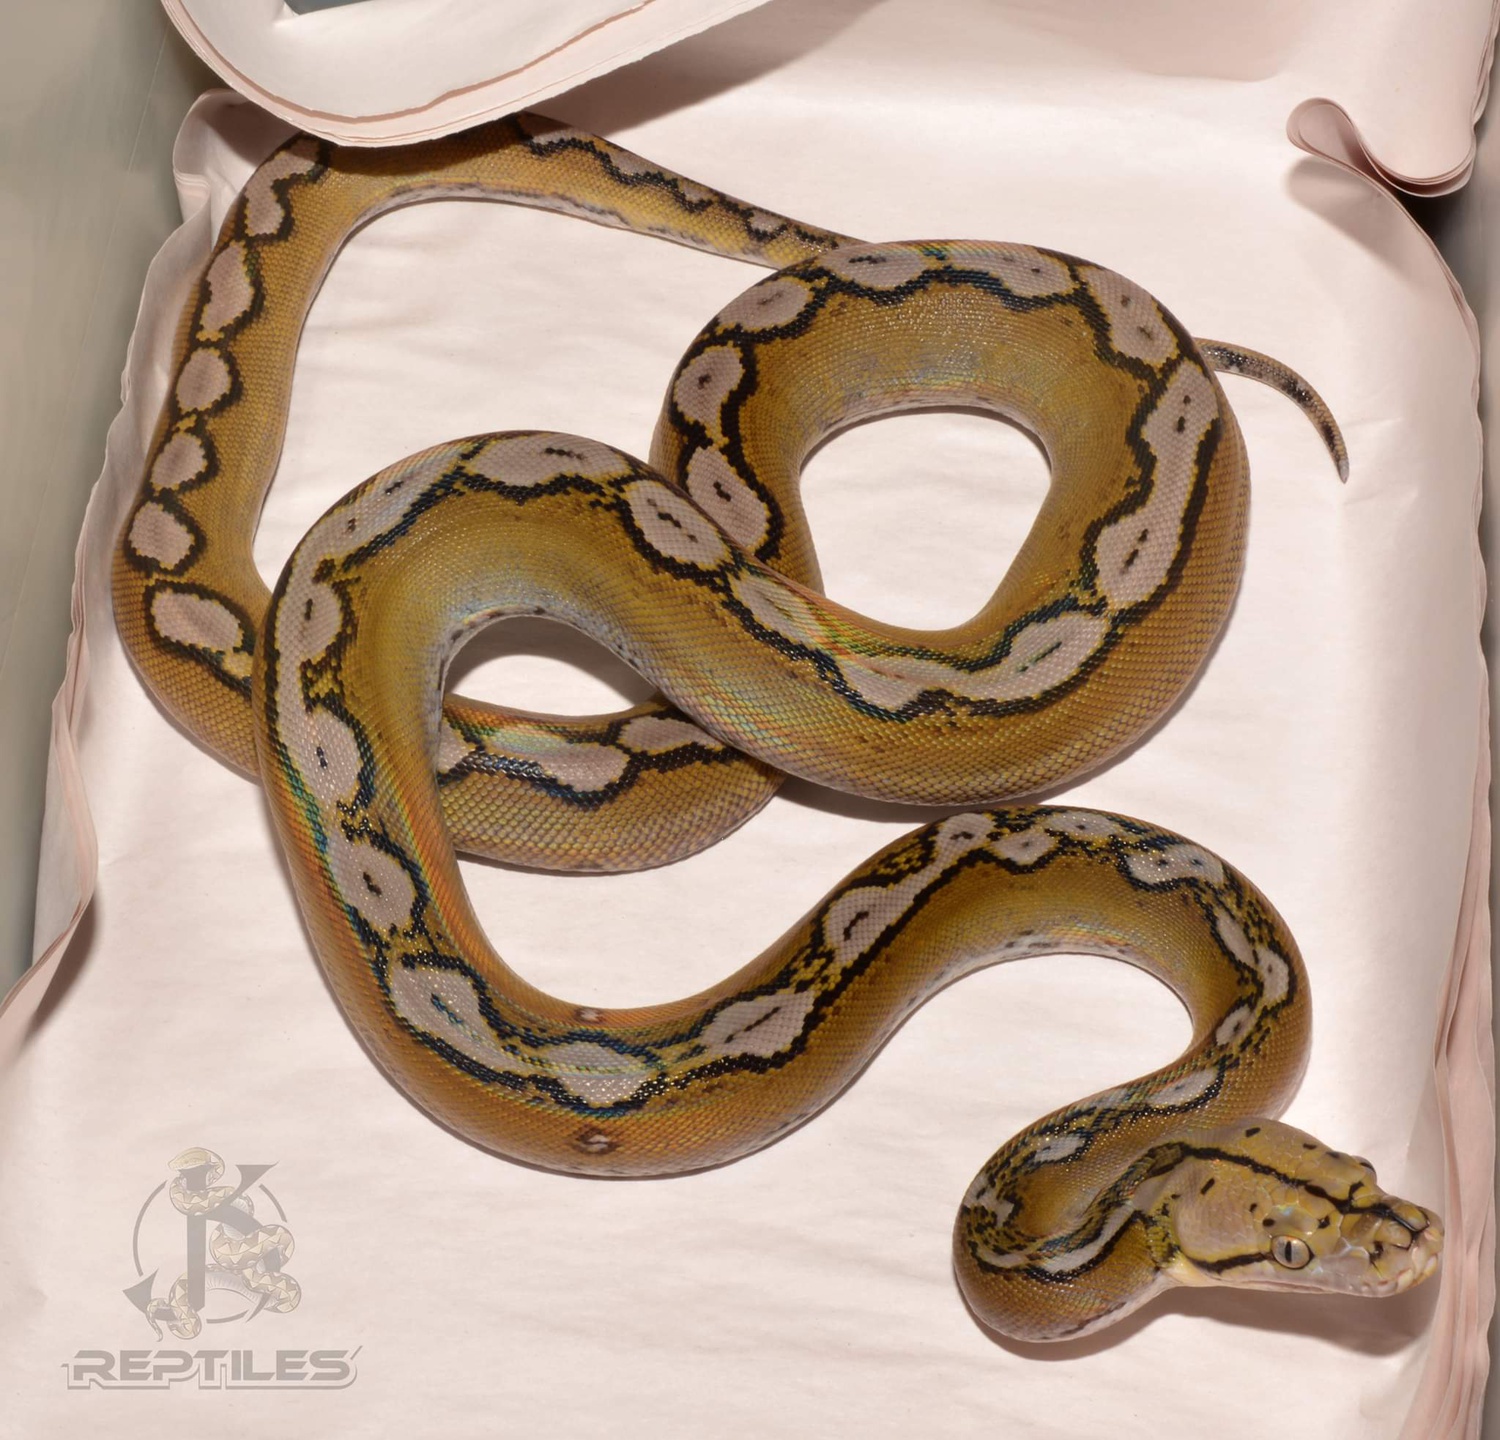 50% Sulawesi Motley Sunfire Reticulated Python by JK Reptiles